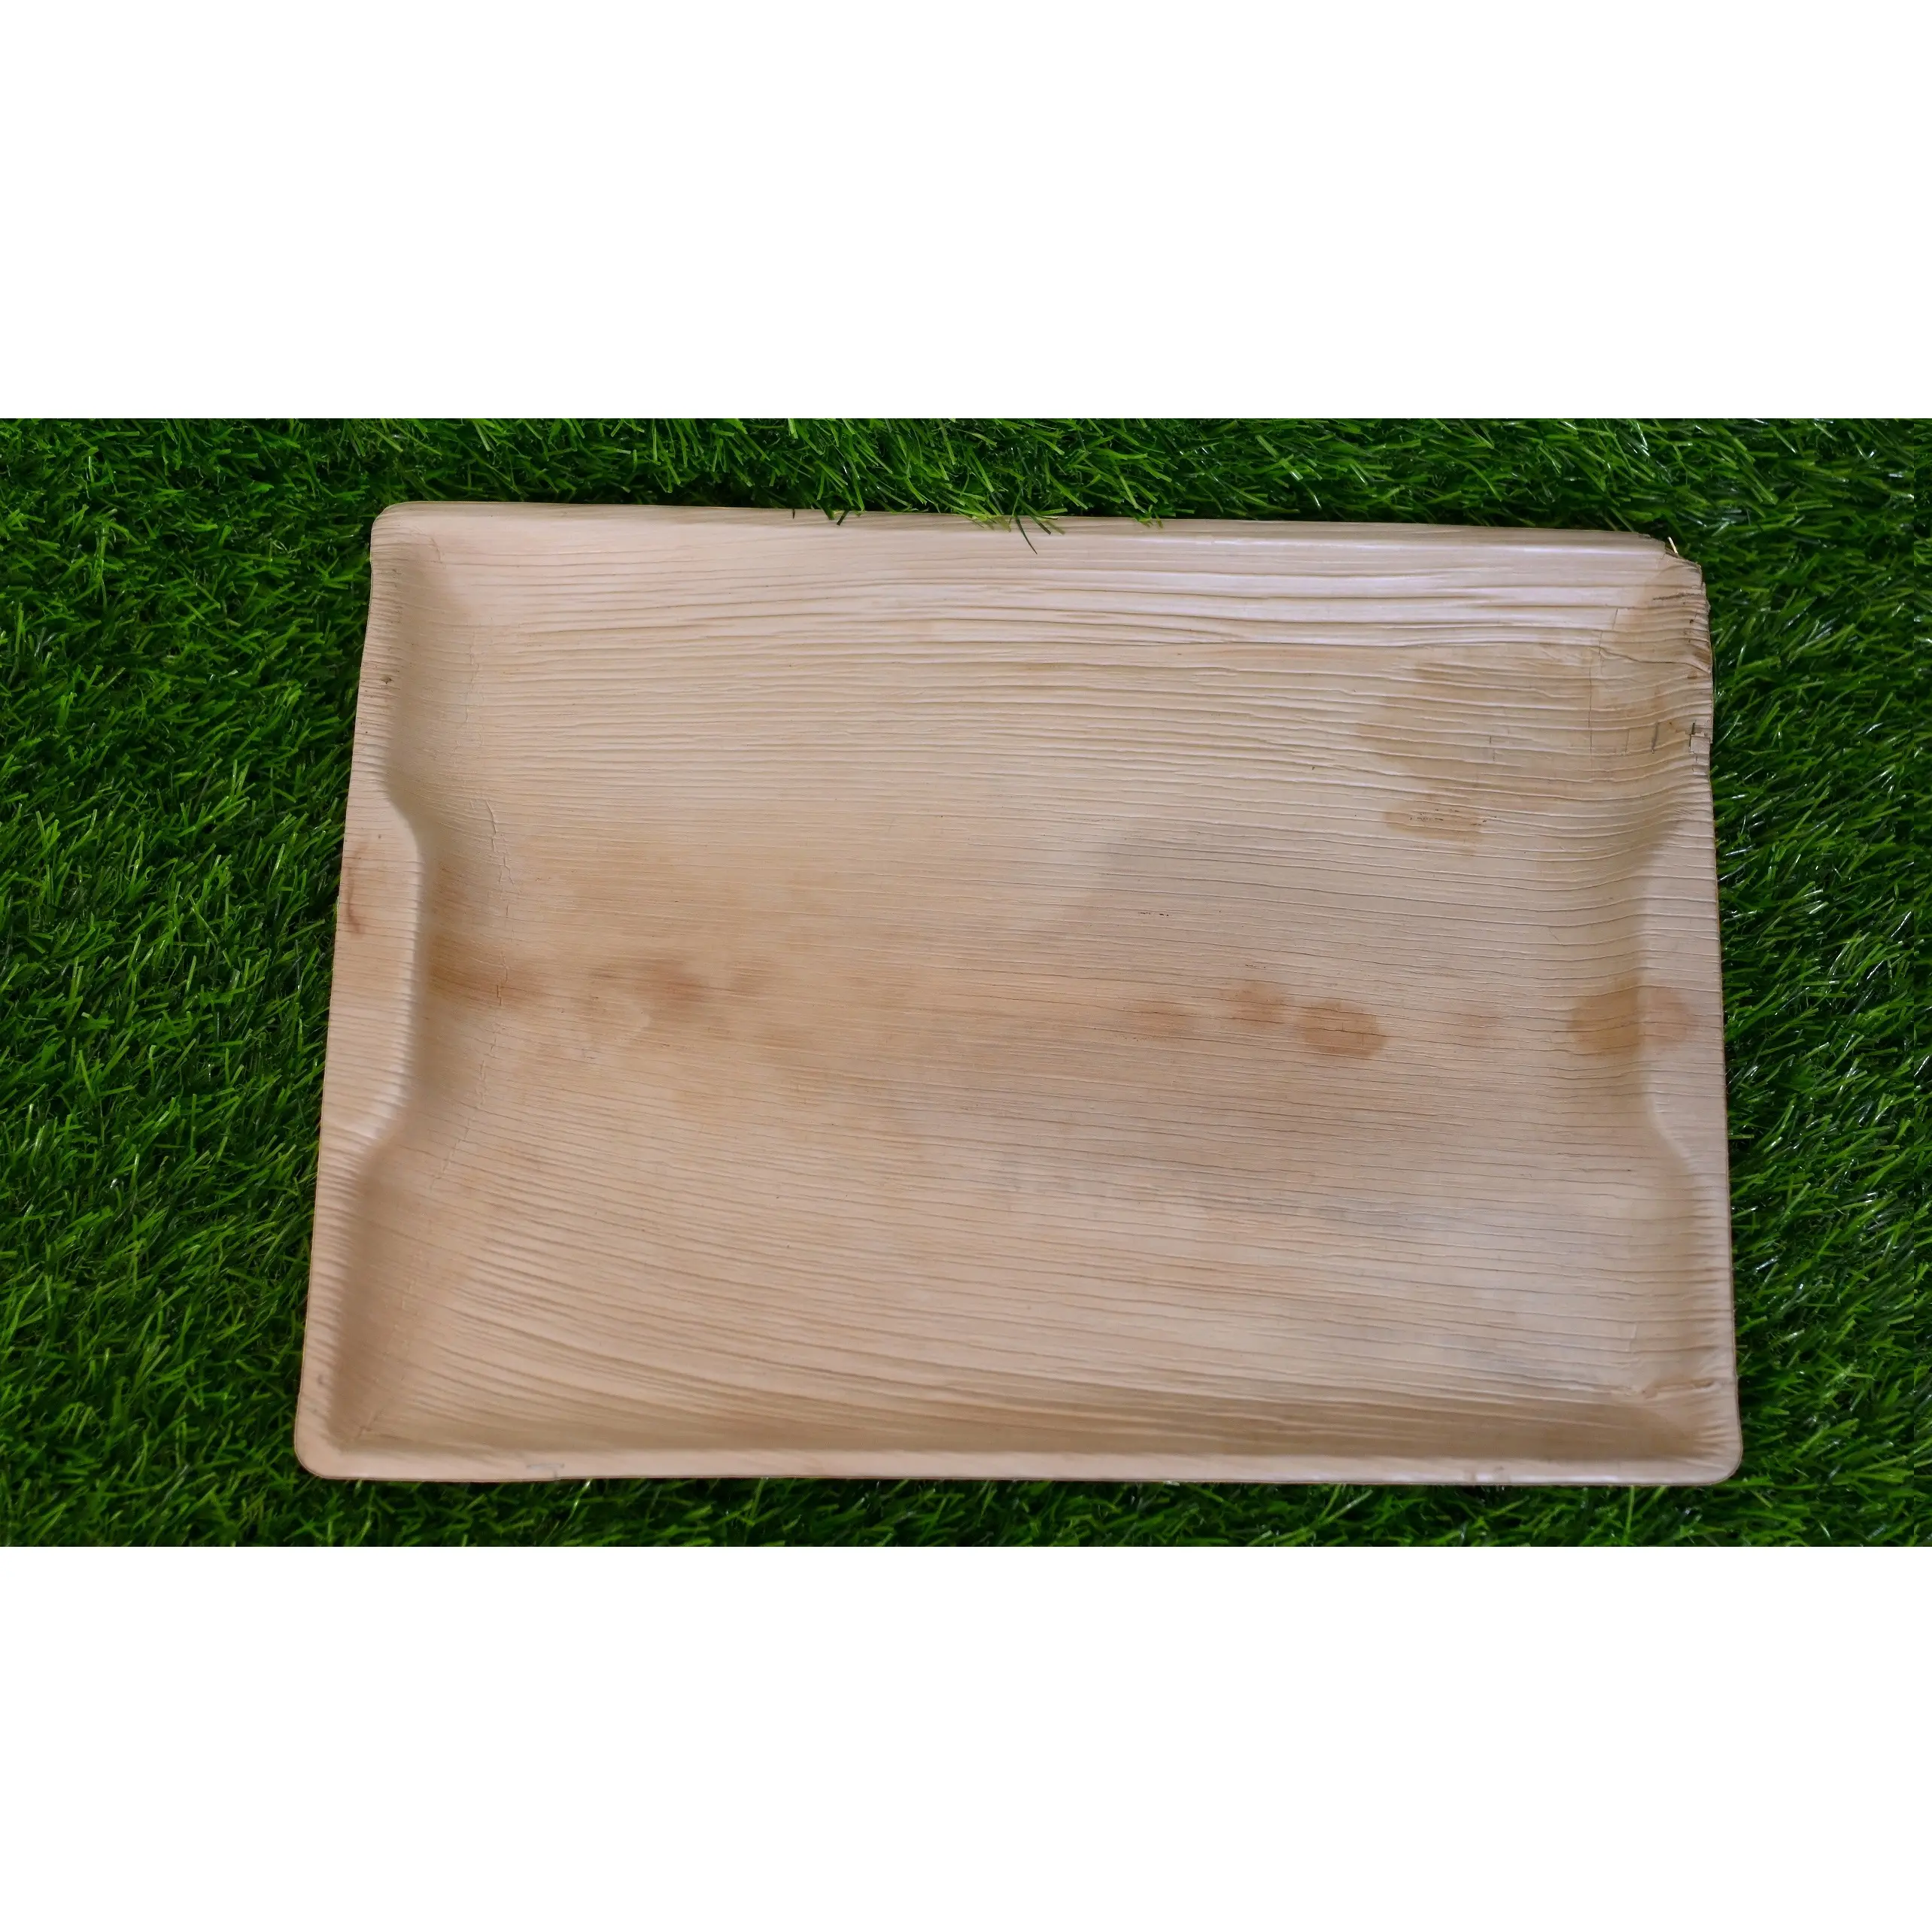 Made in India Decorative Palm Leaf Serving Solution 14.5x10.5 Inch Square Tray for Barbeque and Parties at Best Prices